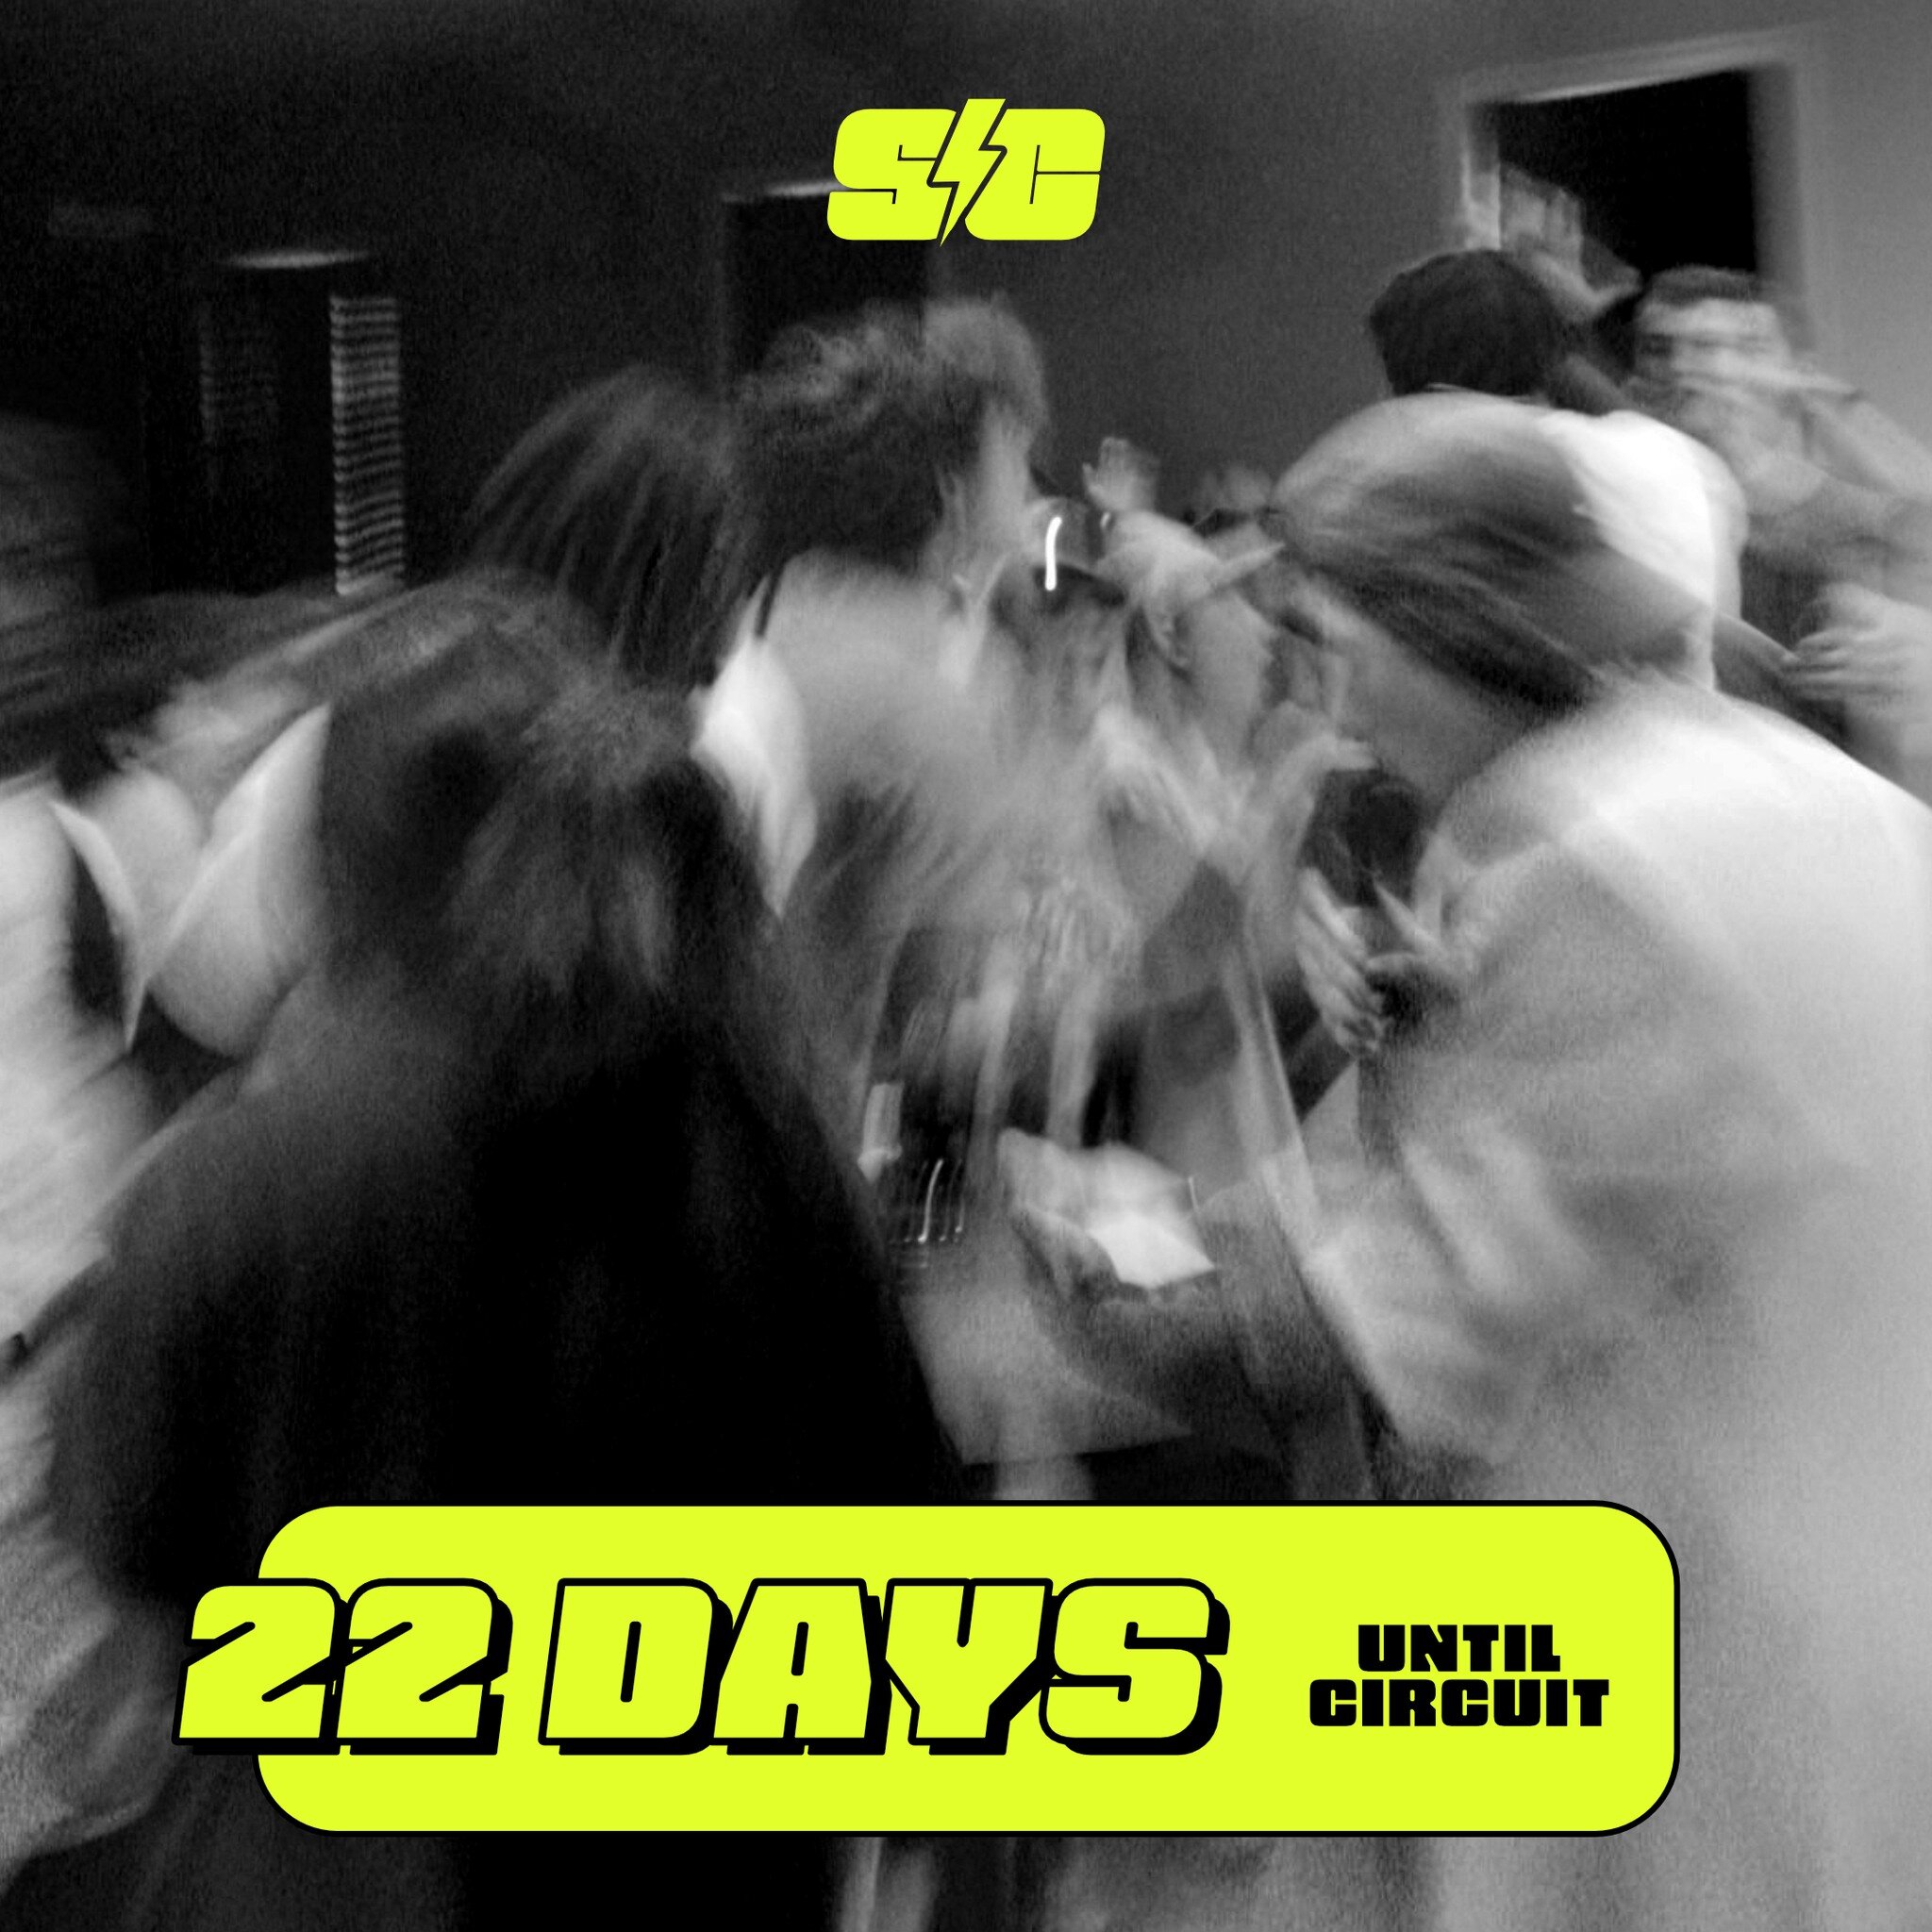 In just 22 days we're taking Summer Circuit to a new level! 
Get ready for 3 brand new activities - and the return of some fan favorites! 
...
thegrove.tv/circuit23